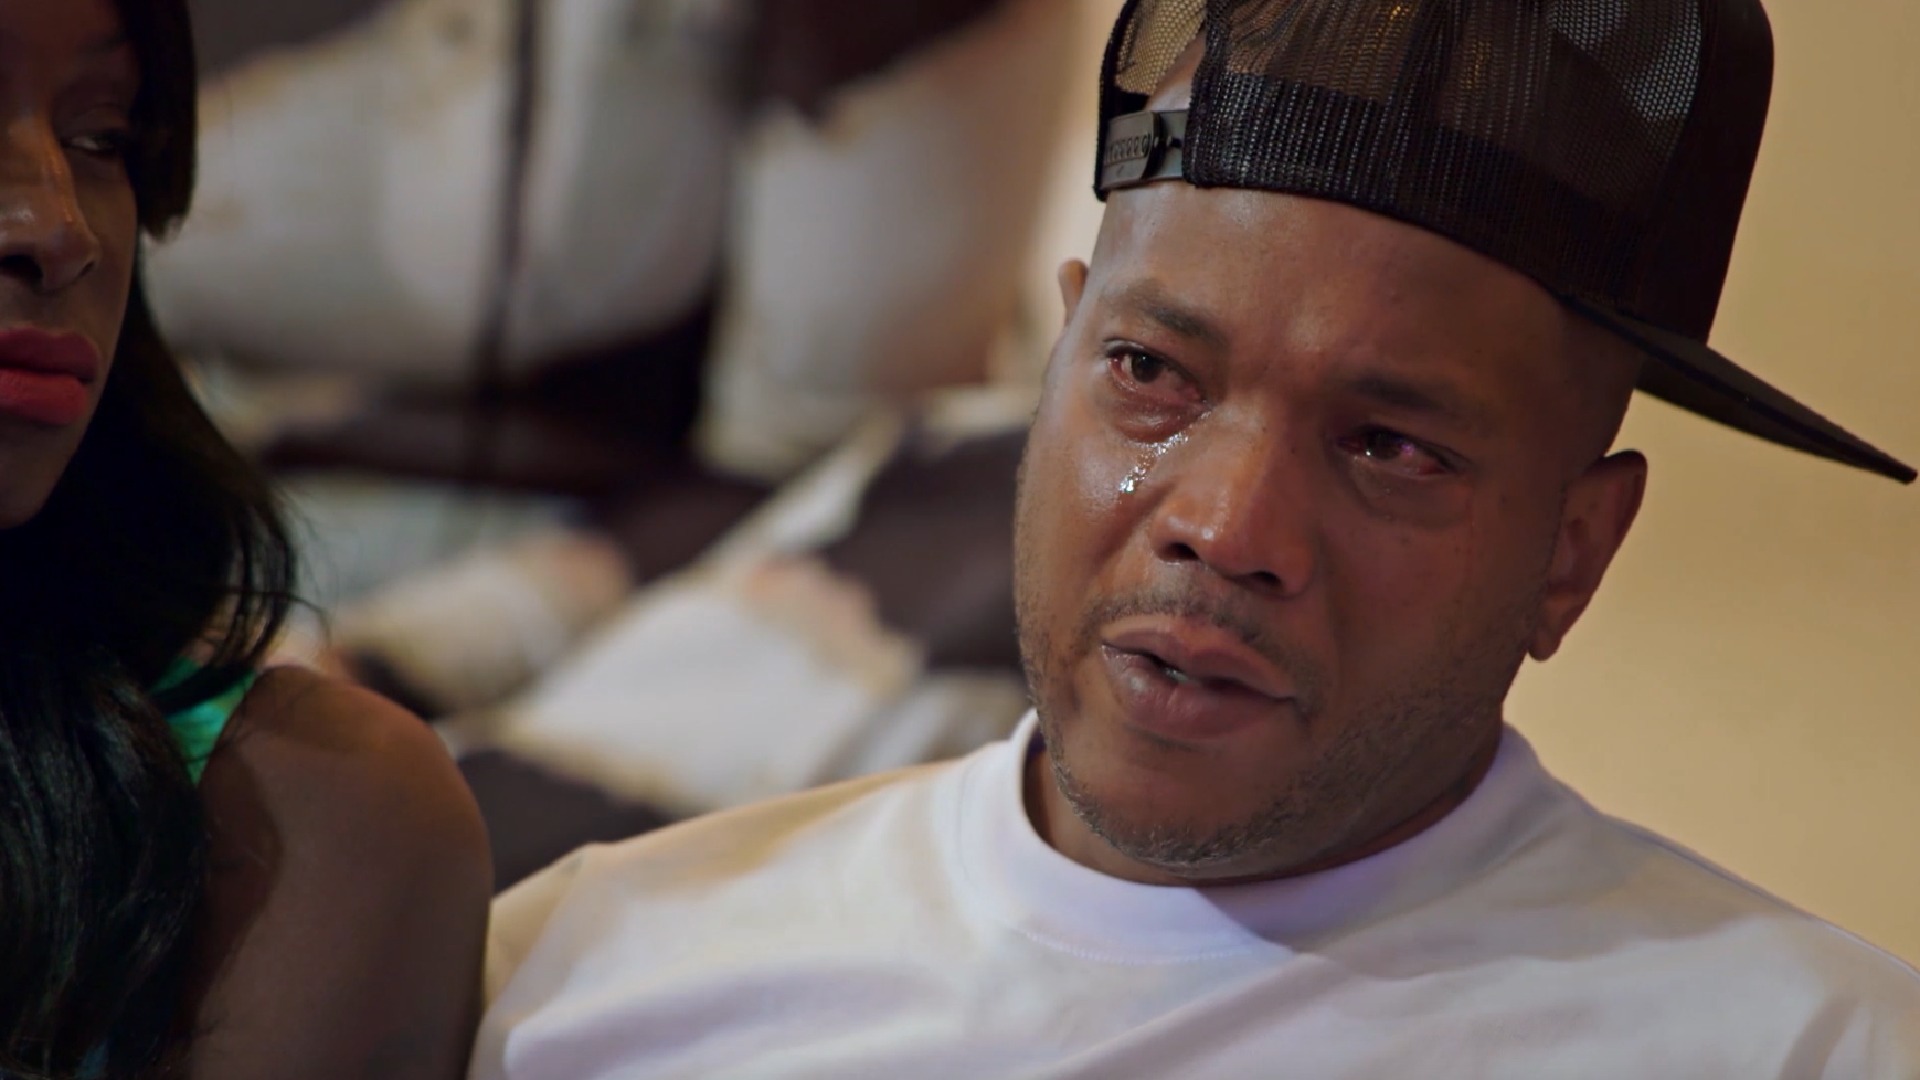 Watch 'Real Men Do Cry' | Marriage Boot Camp: Hip Hop Edition Video Extras